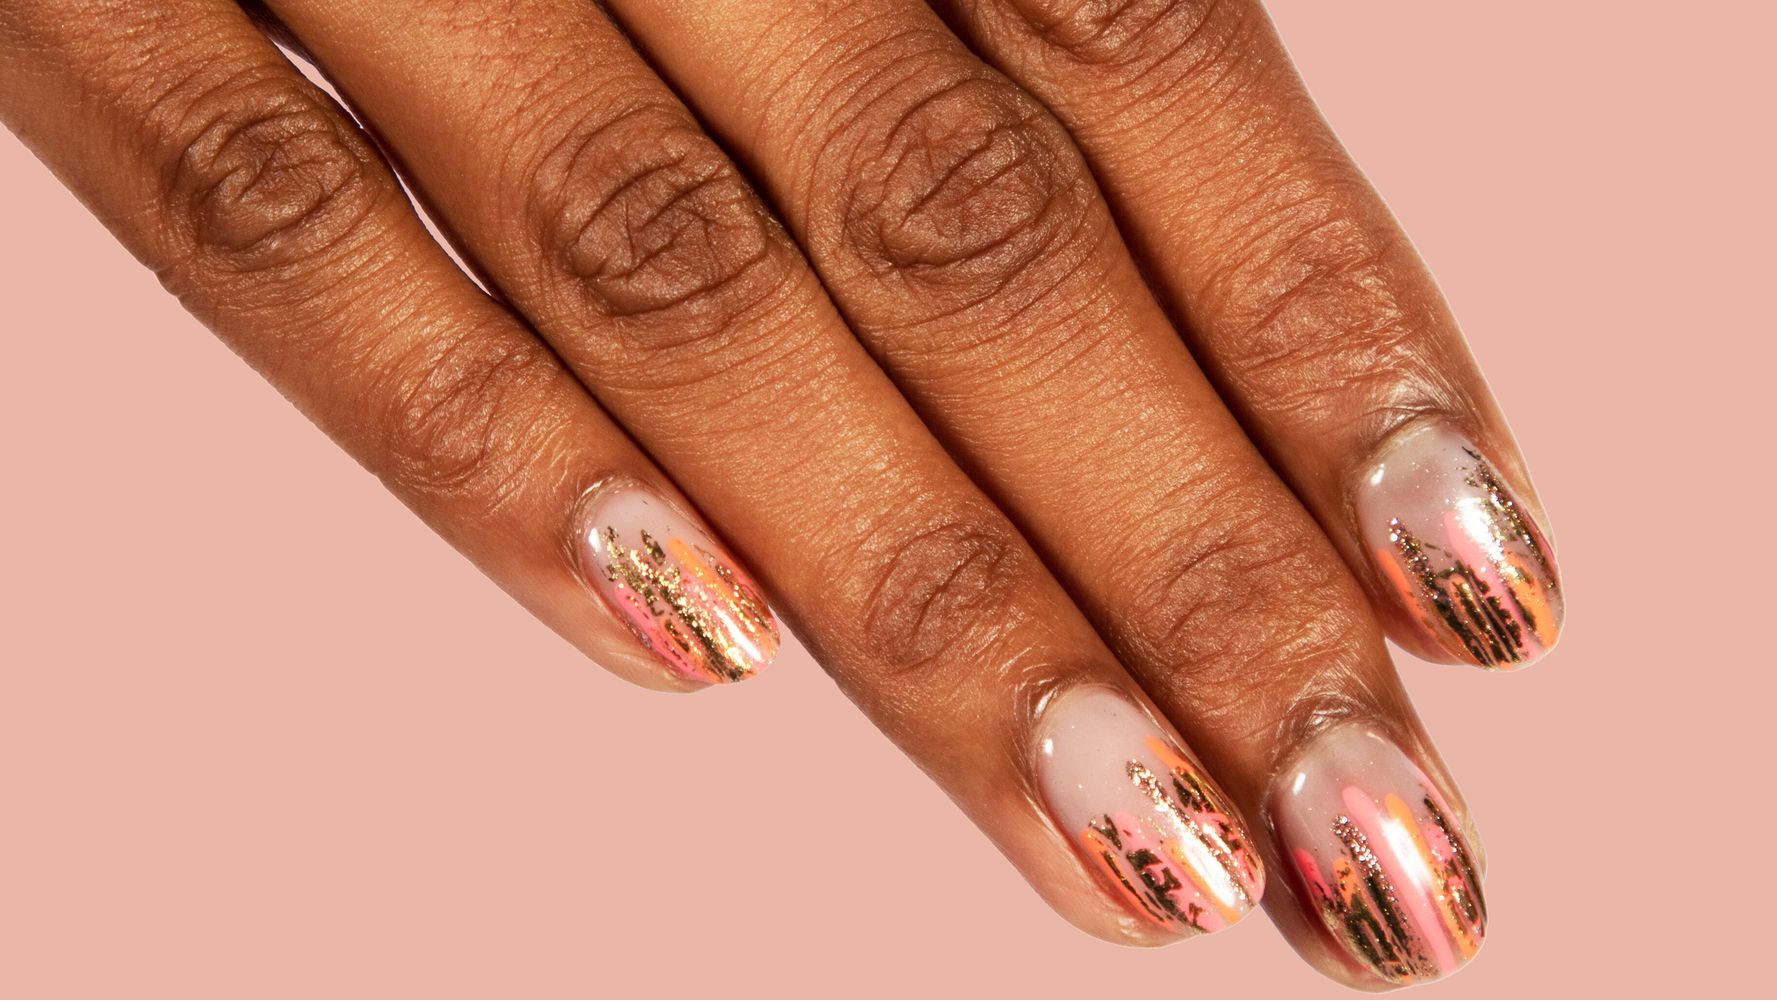 Gel Manicures Look Good, But What's The Damage To Your Nails